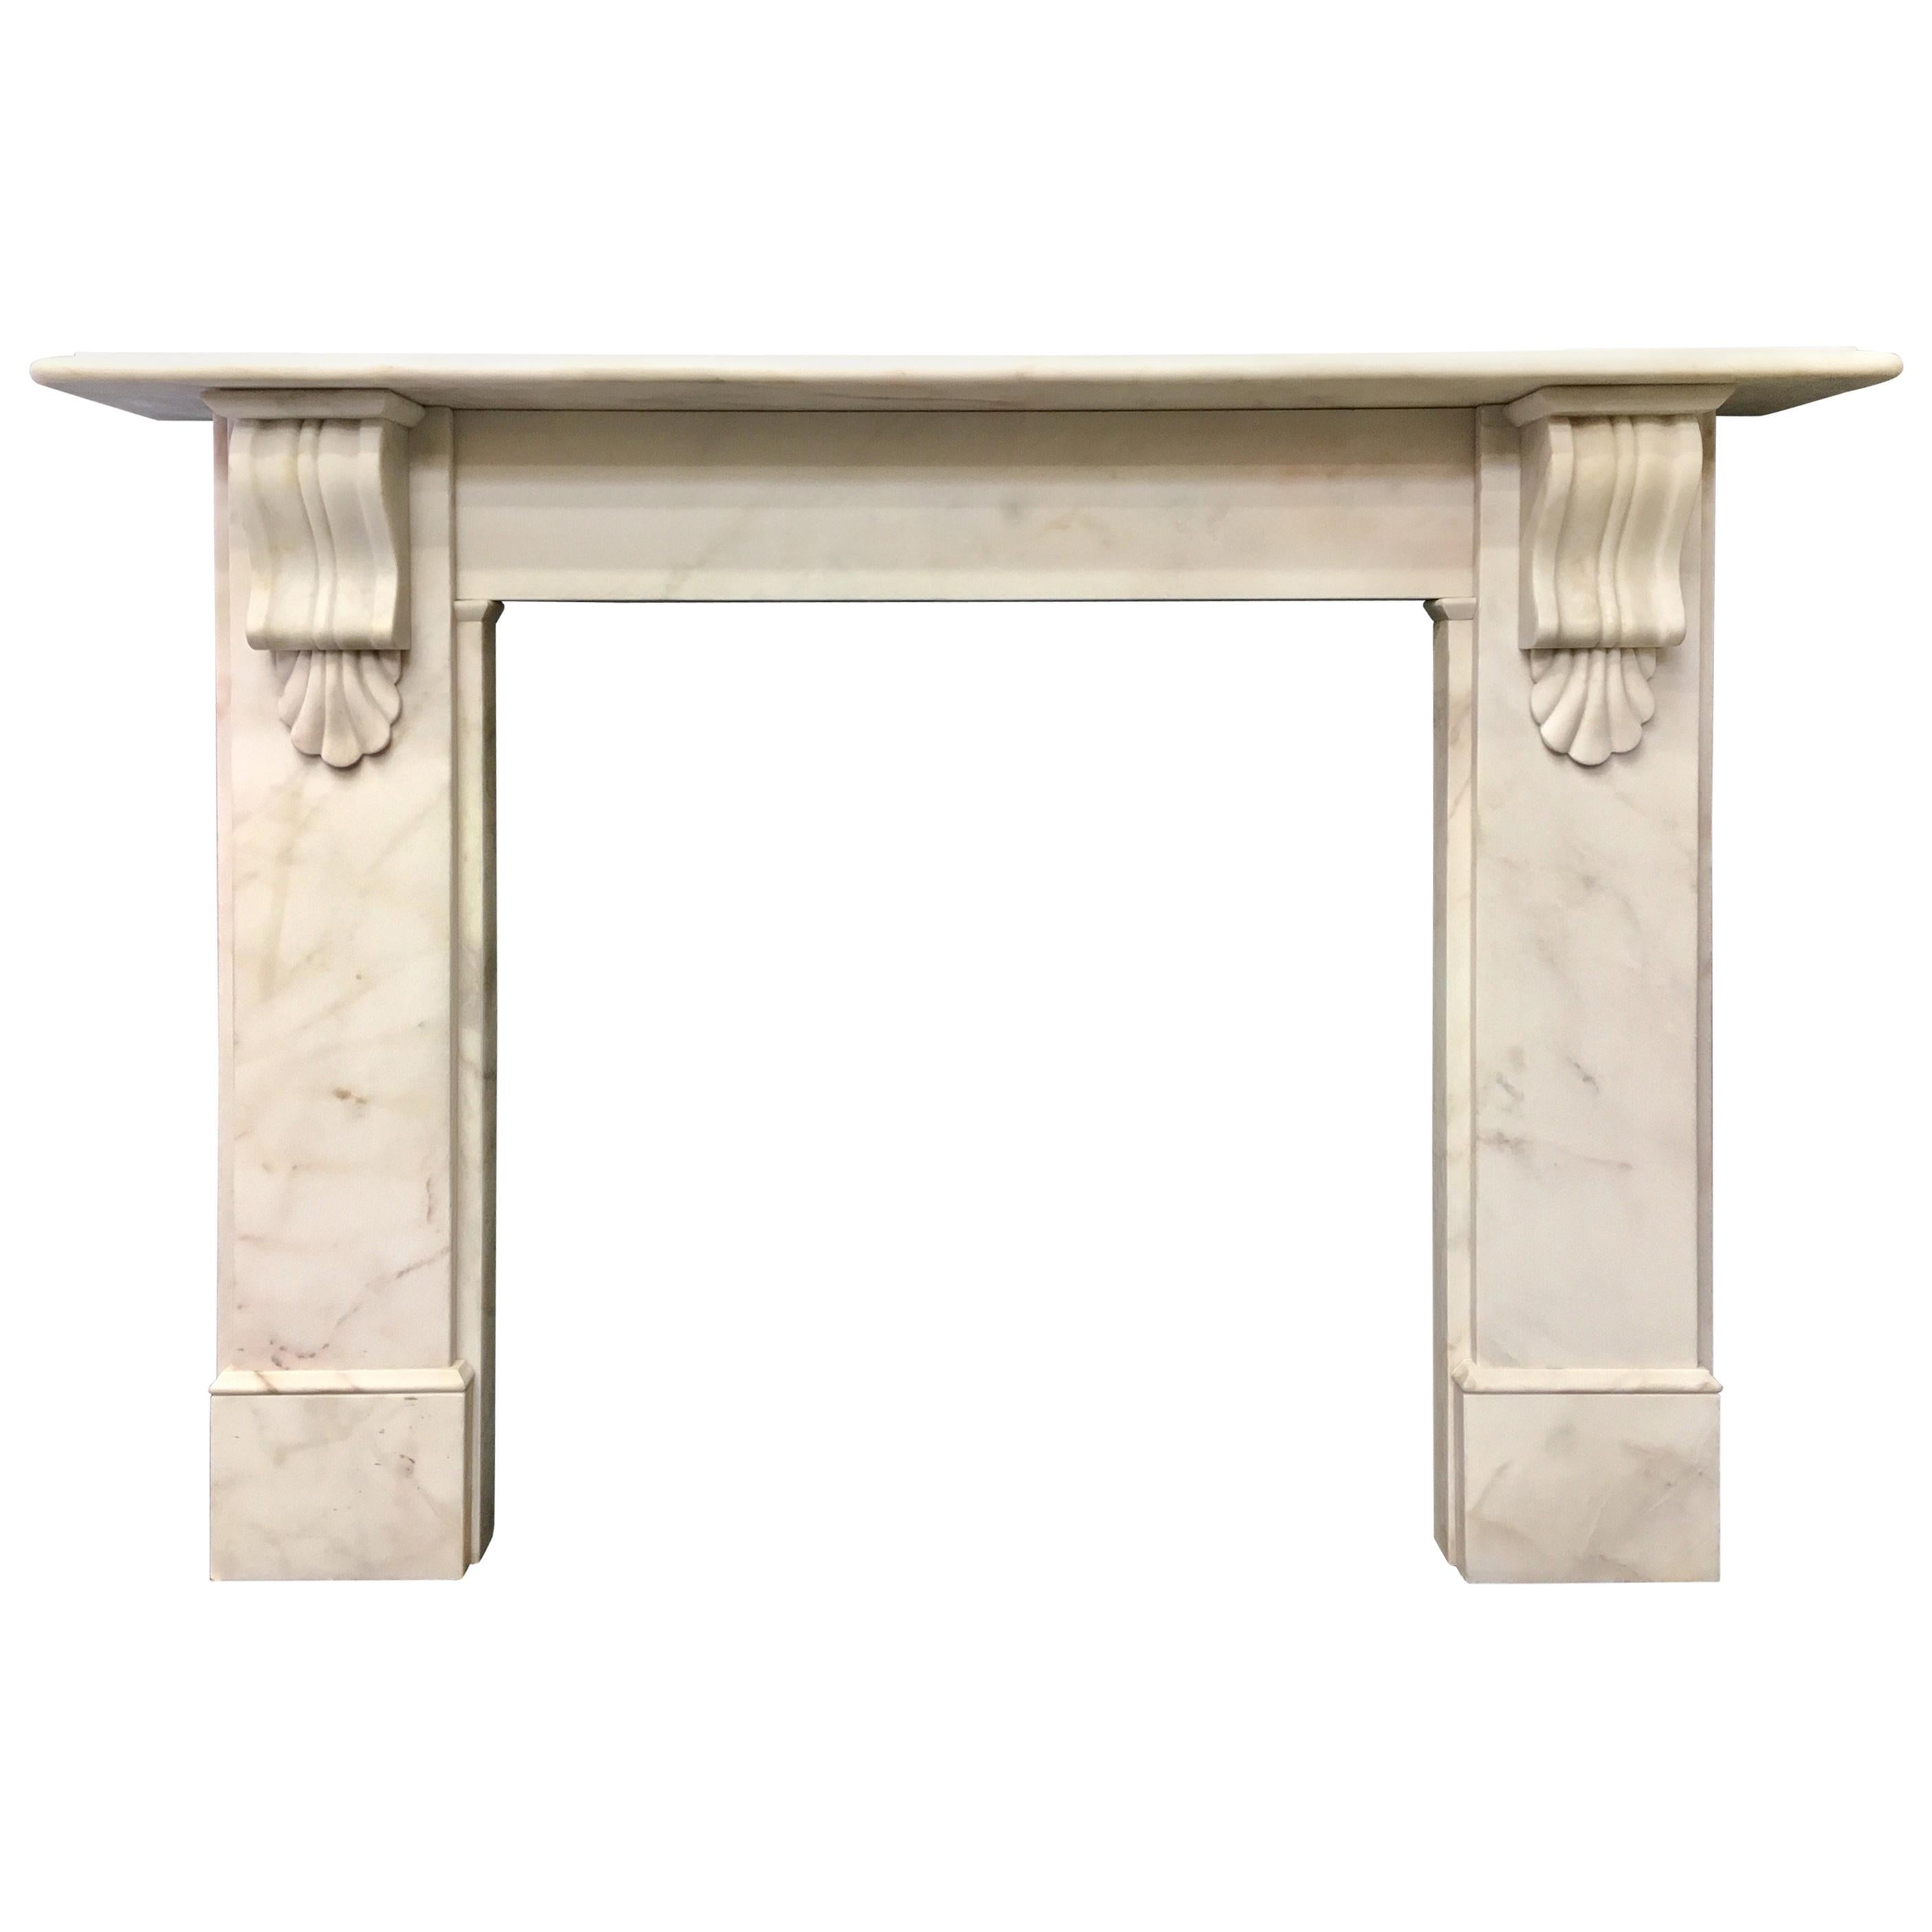 Period Marble Fireplace Surround and Cast Iron Insert